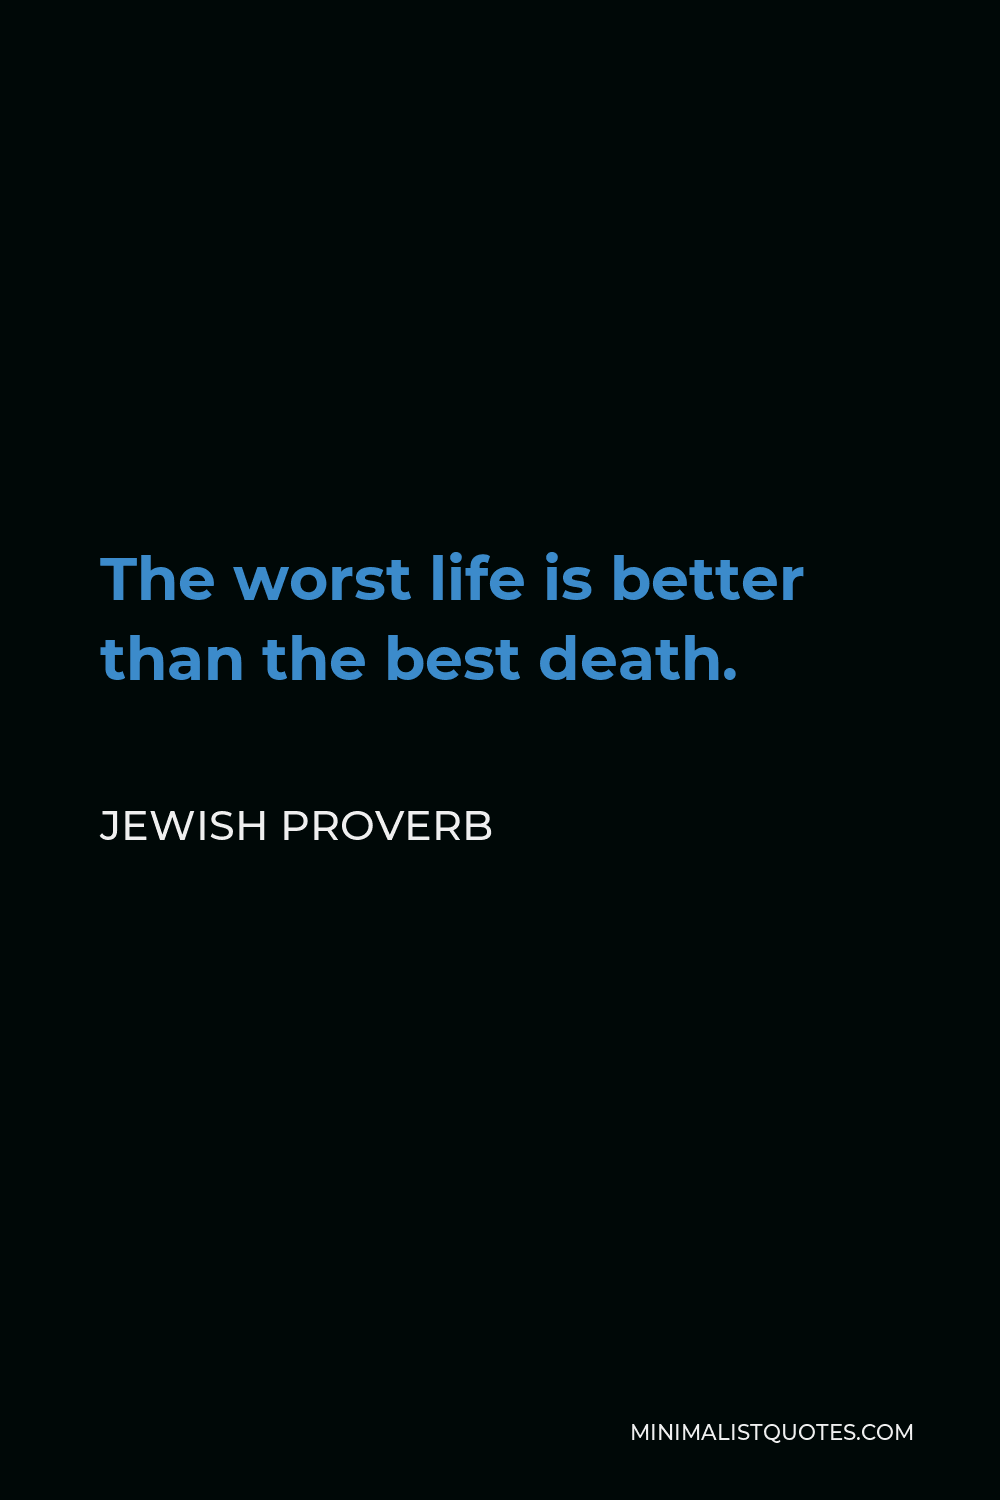 Jewish Proverb Quote - The worst life is better than the best death.